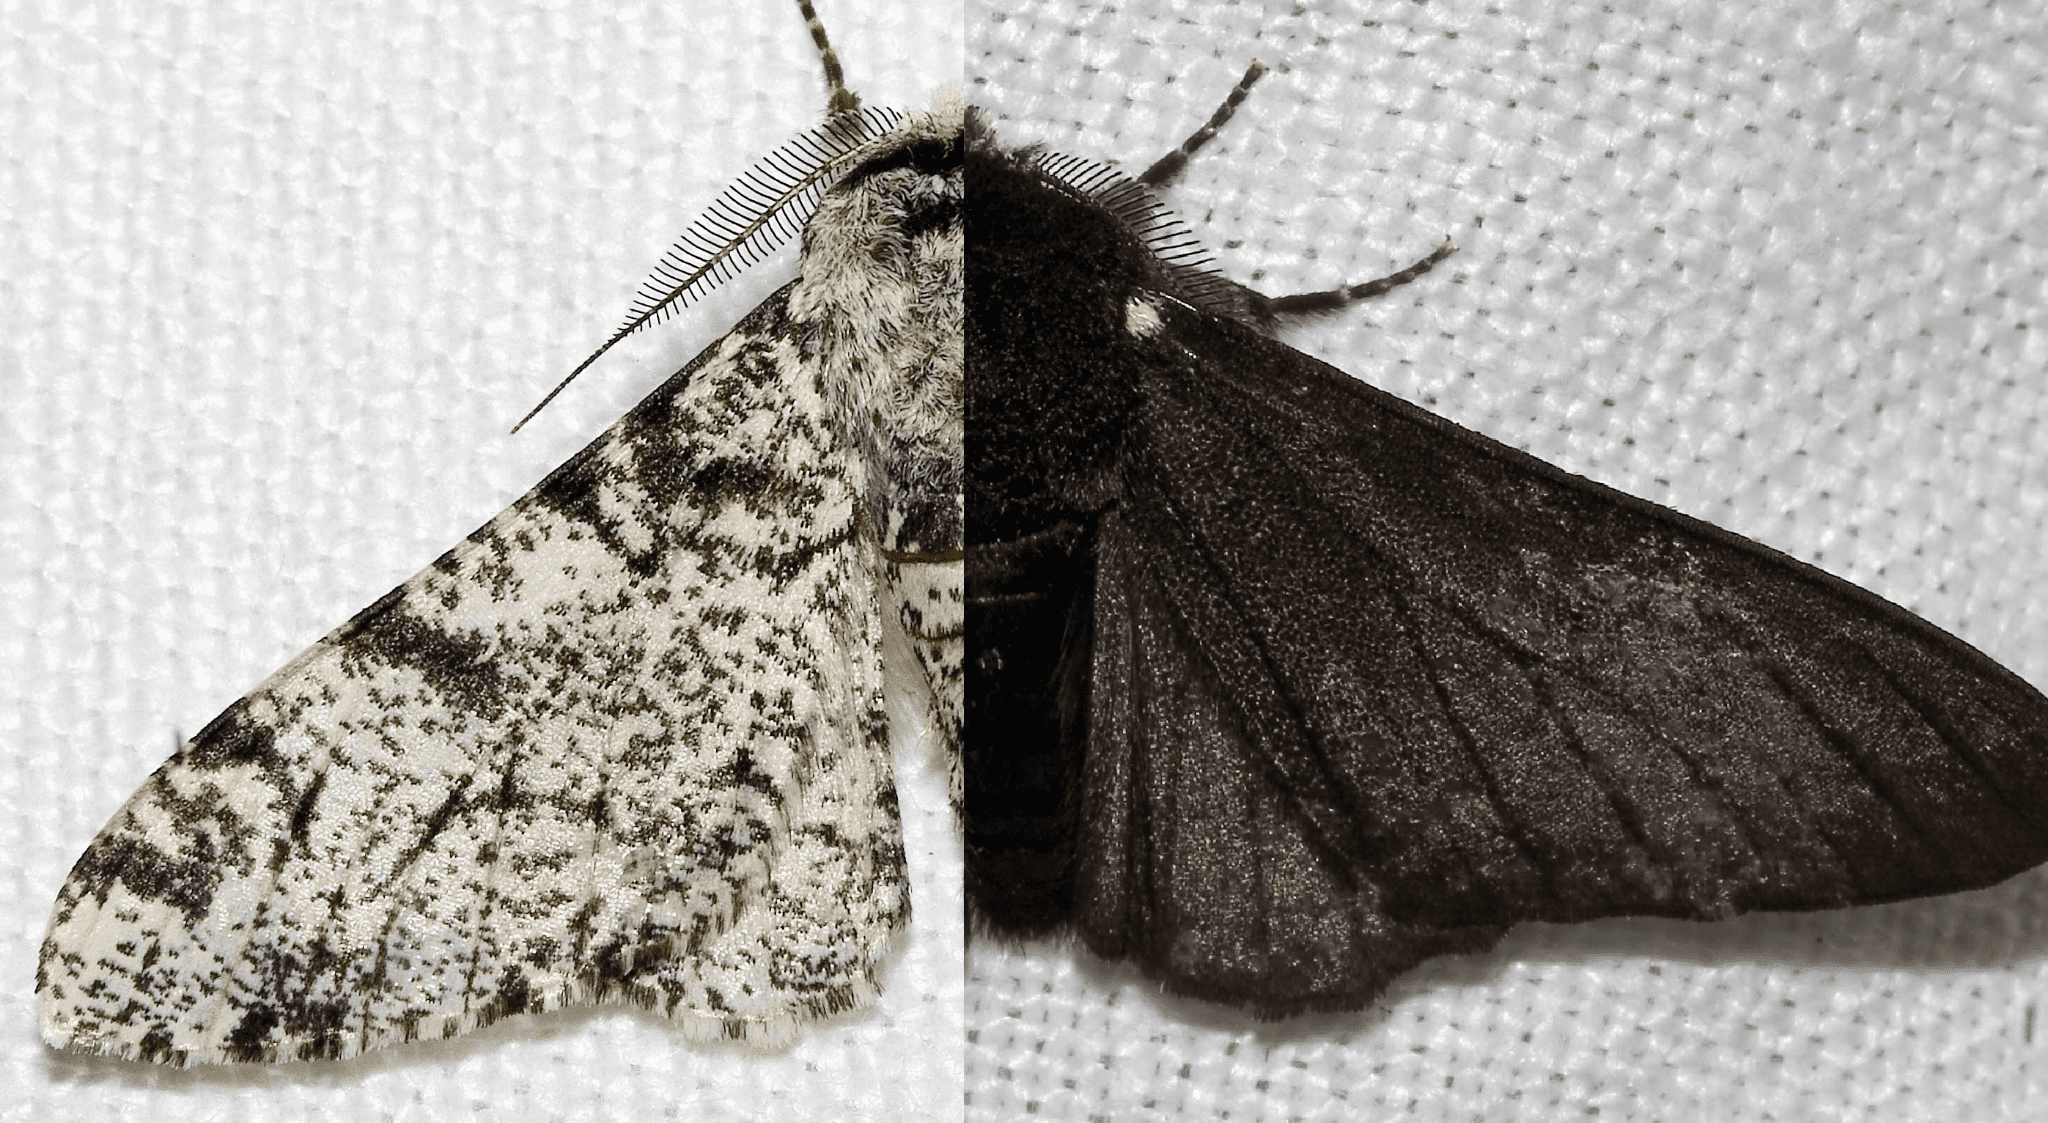 Side by side view of the original peppered moth and the darker colored peppered moth